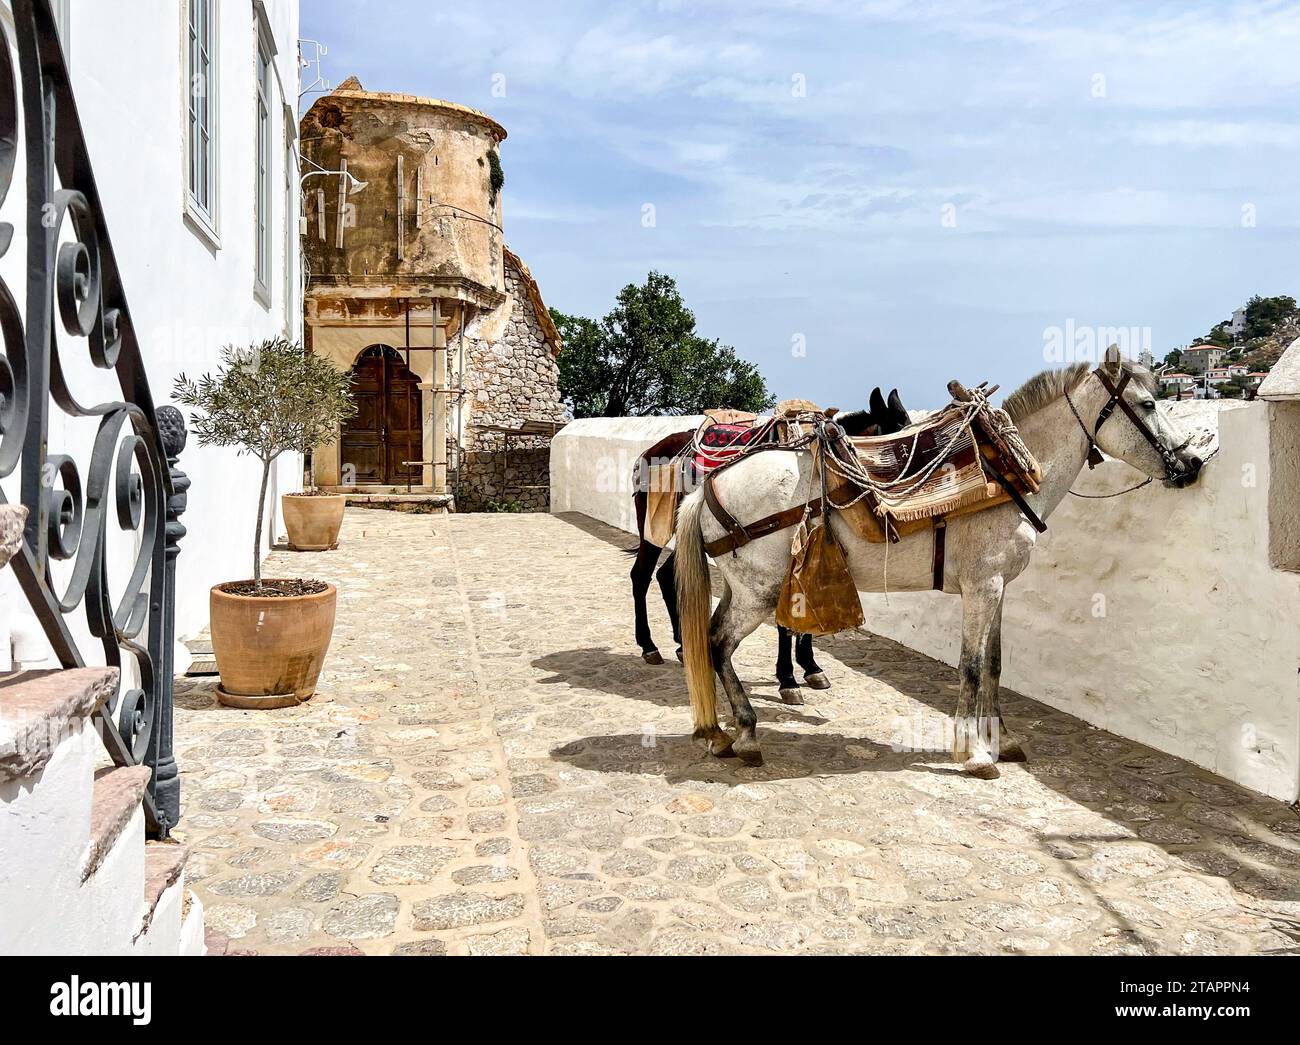 Two working Horses standing by a wall in town, Hydra Port, Hydra (Ydra or Idra), Saronic Islands, Greece Stock Photo